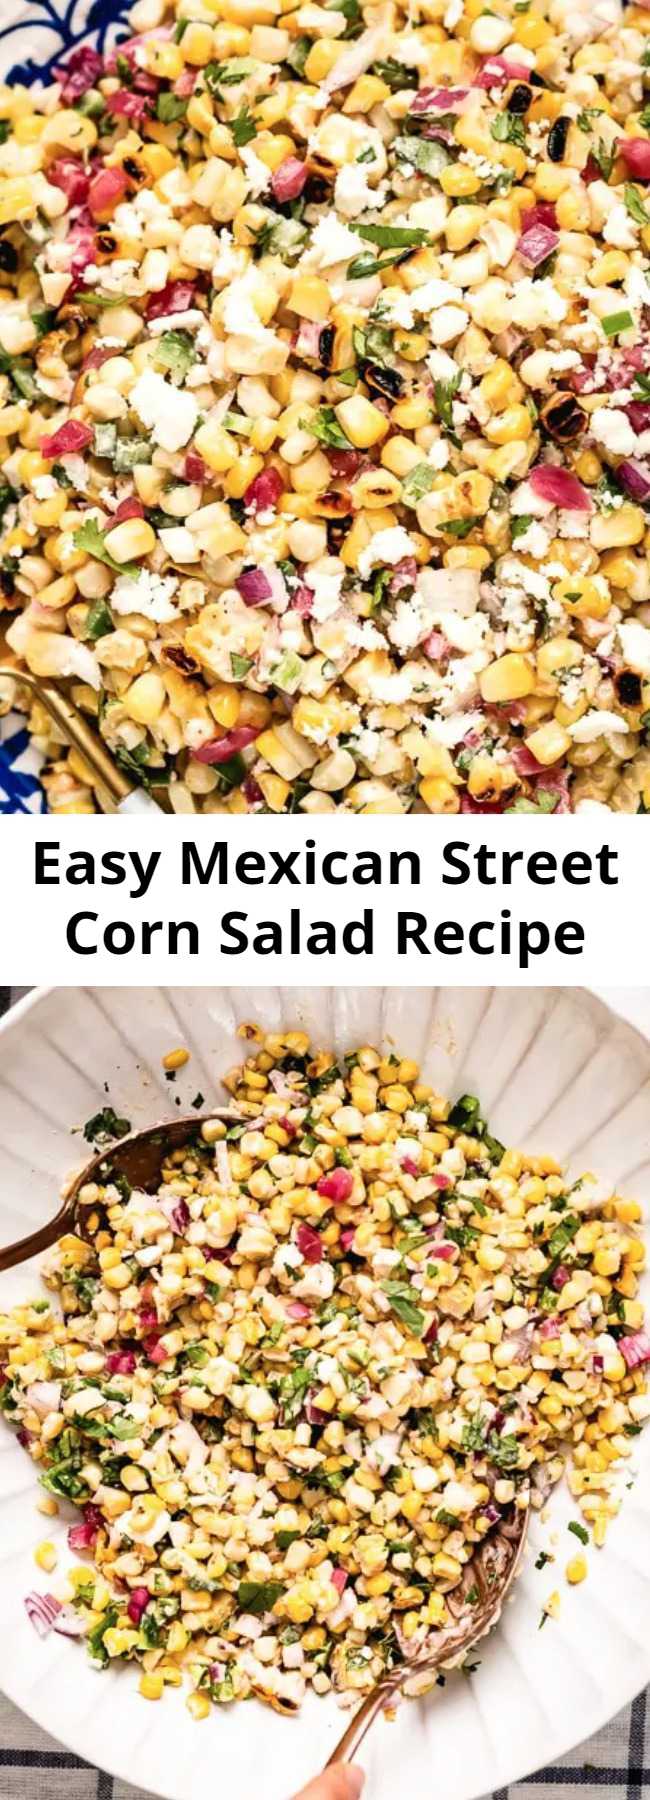 Easy Mexican Street Corn Salad Recipe - This Mexican Street Corn Salad recipe (aka Esquites or Elote salad) is tangy, spicy, and deliciously creamy. Whether you cook the corn on the grill or in a skillet, this easy Mexican corn salad is guaranteed to be a hit for all your summer gatherings. #corn #salad #cornsalad #mexicancorn #mexicansalad #sweetcornsalad